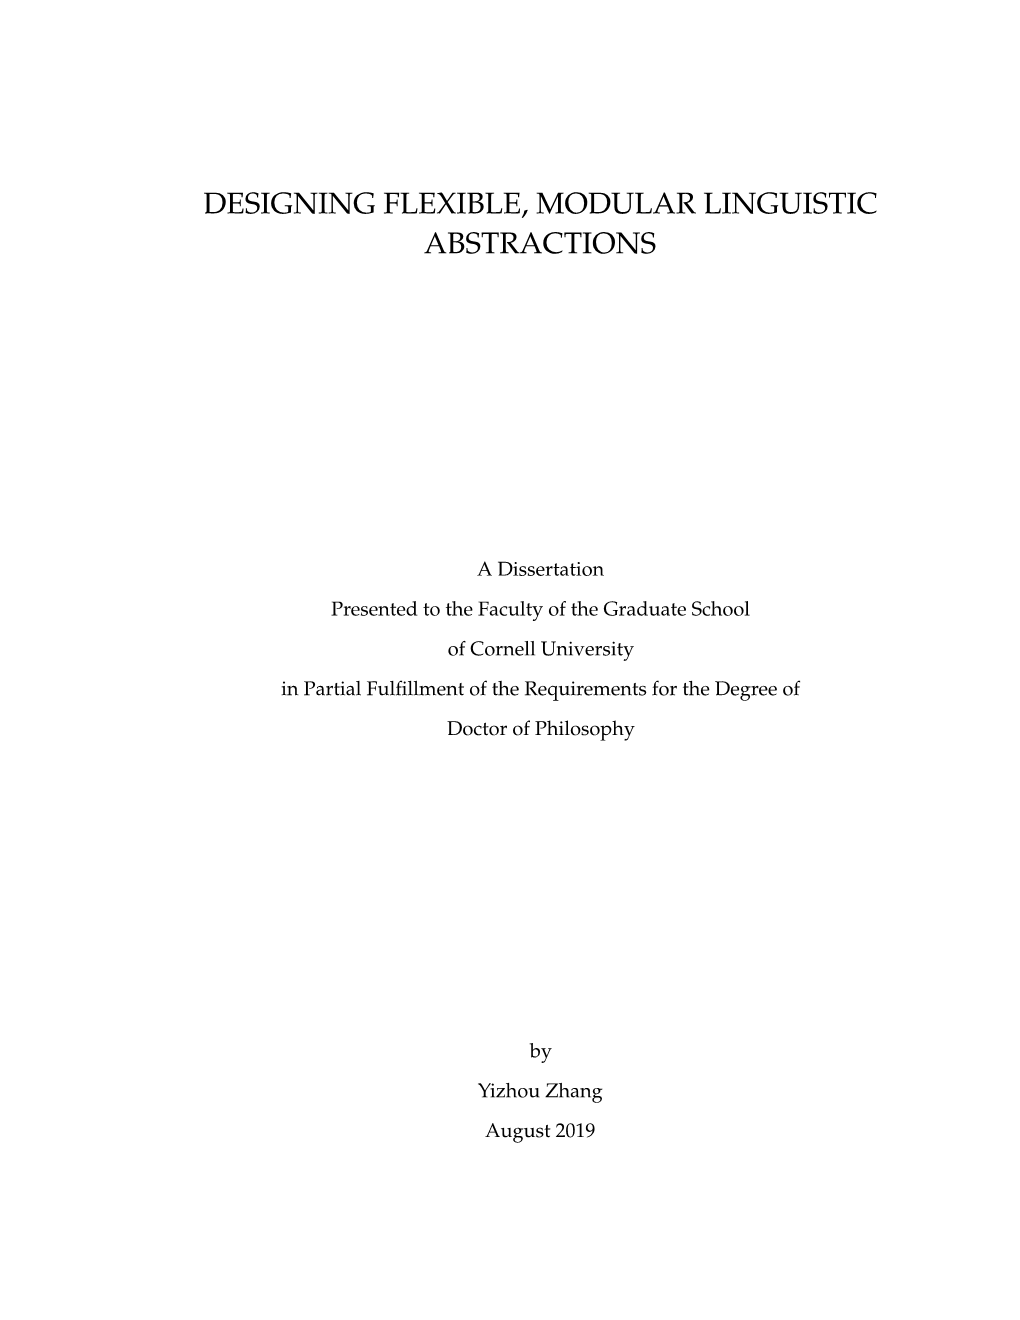 Designing Flexible, Modular Linguistic Abstractions